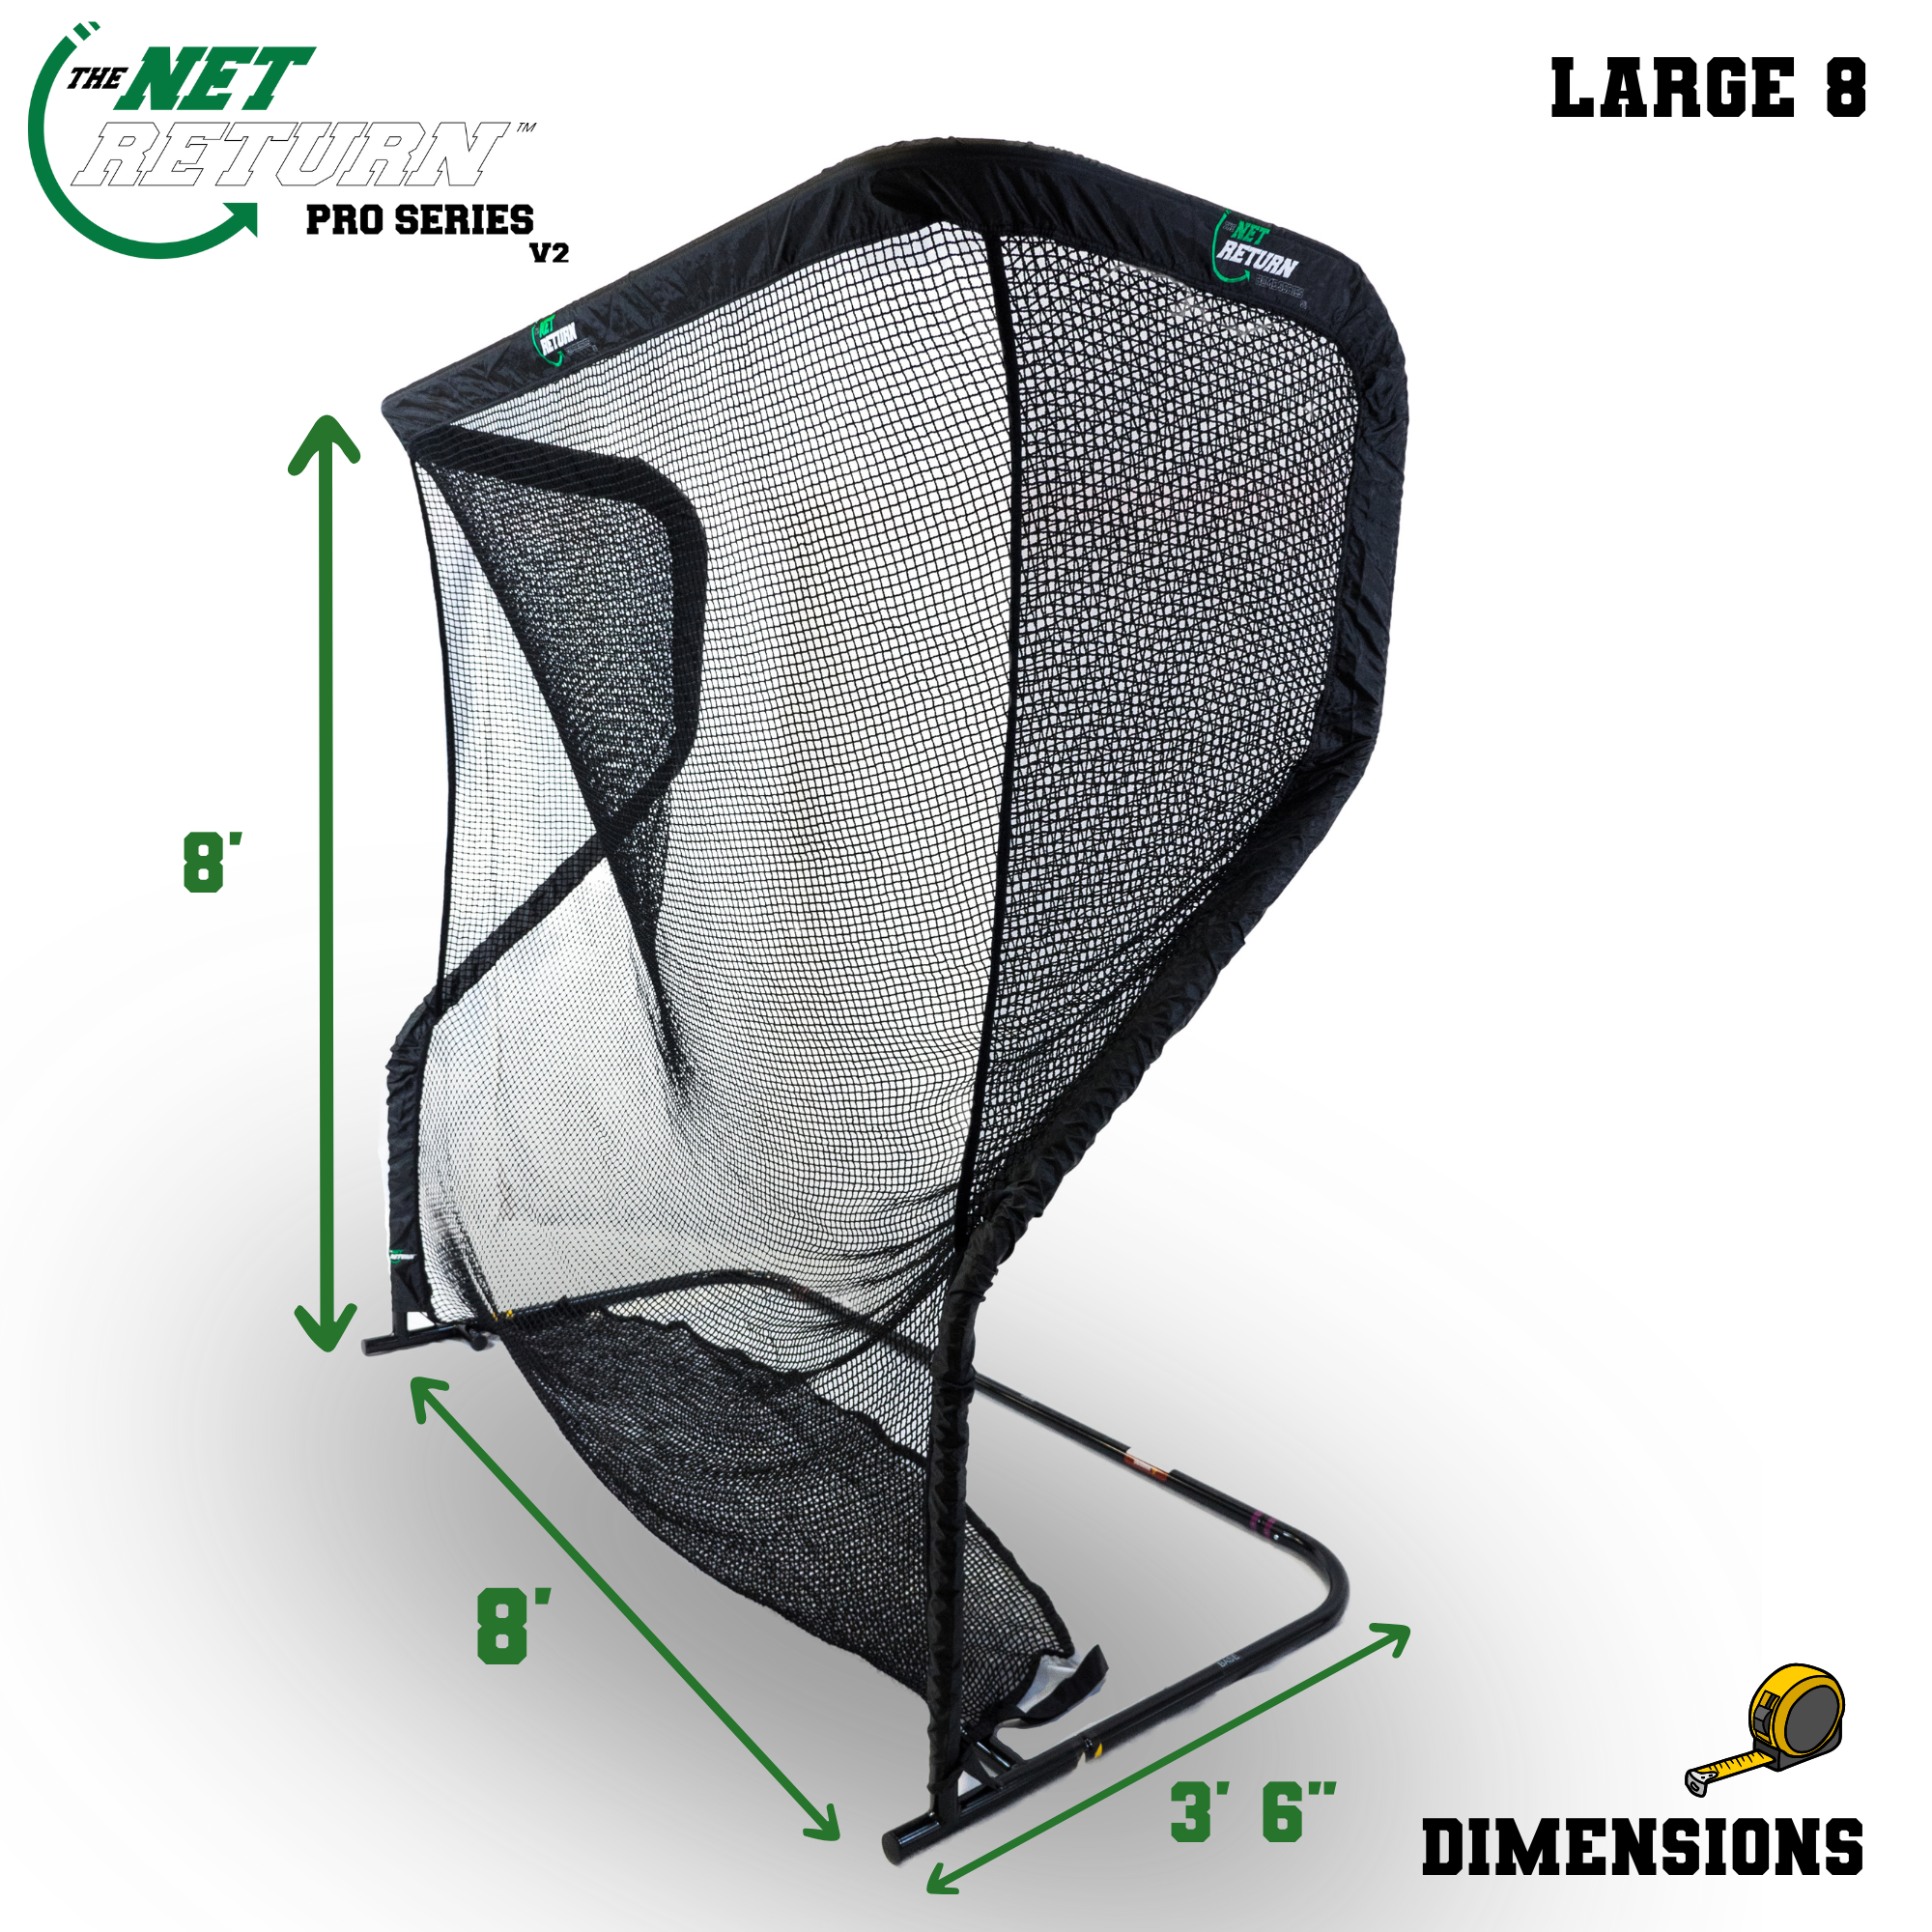 The Net Return Large 8' Pro Package